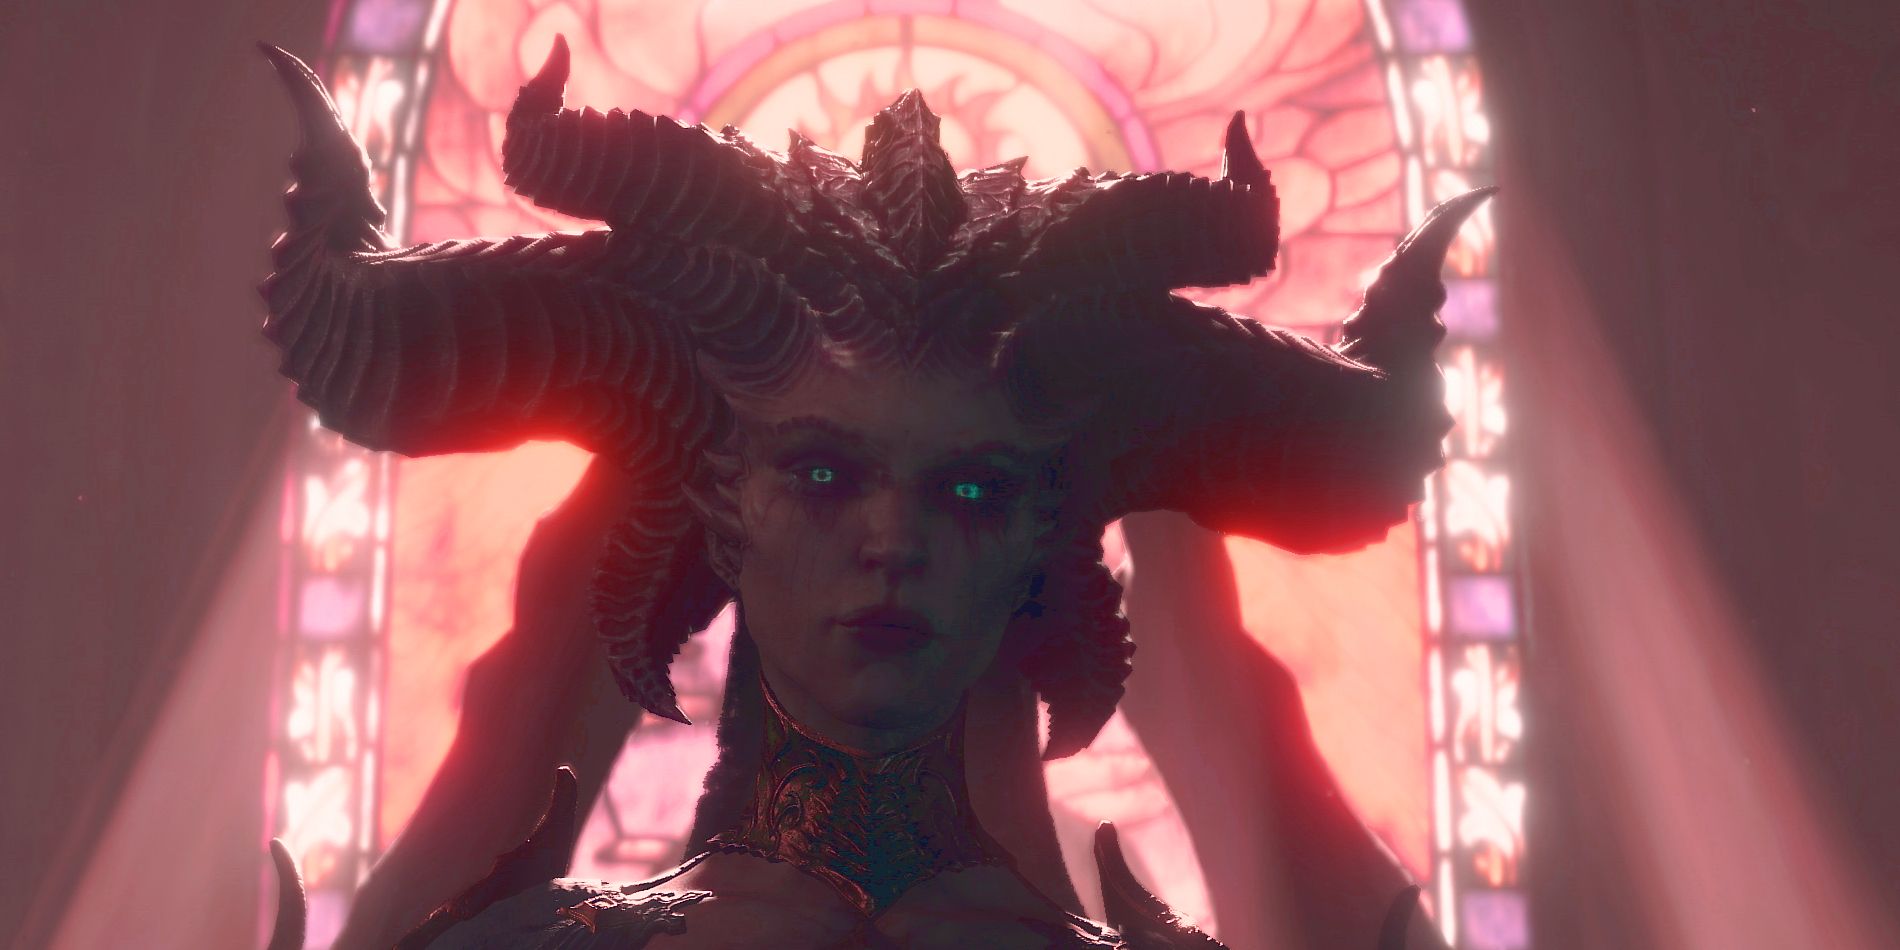 The main villian of Diablo 4, Lilith, is seen looking menicingly towards the screen with light ray shining through a stainglass window behind her.